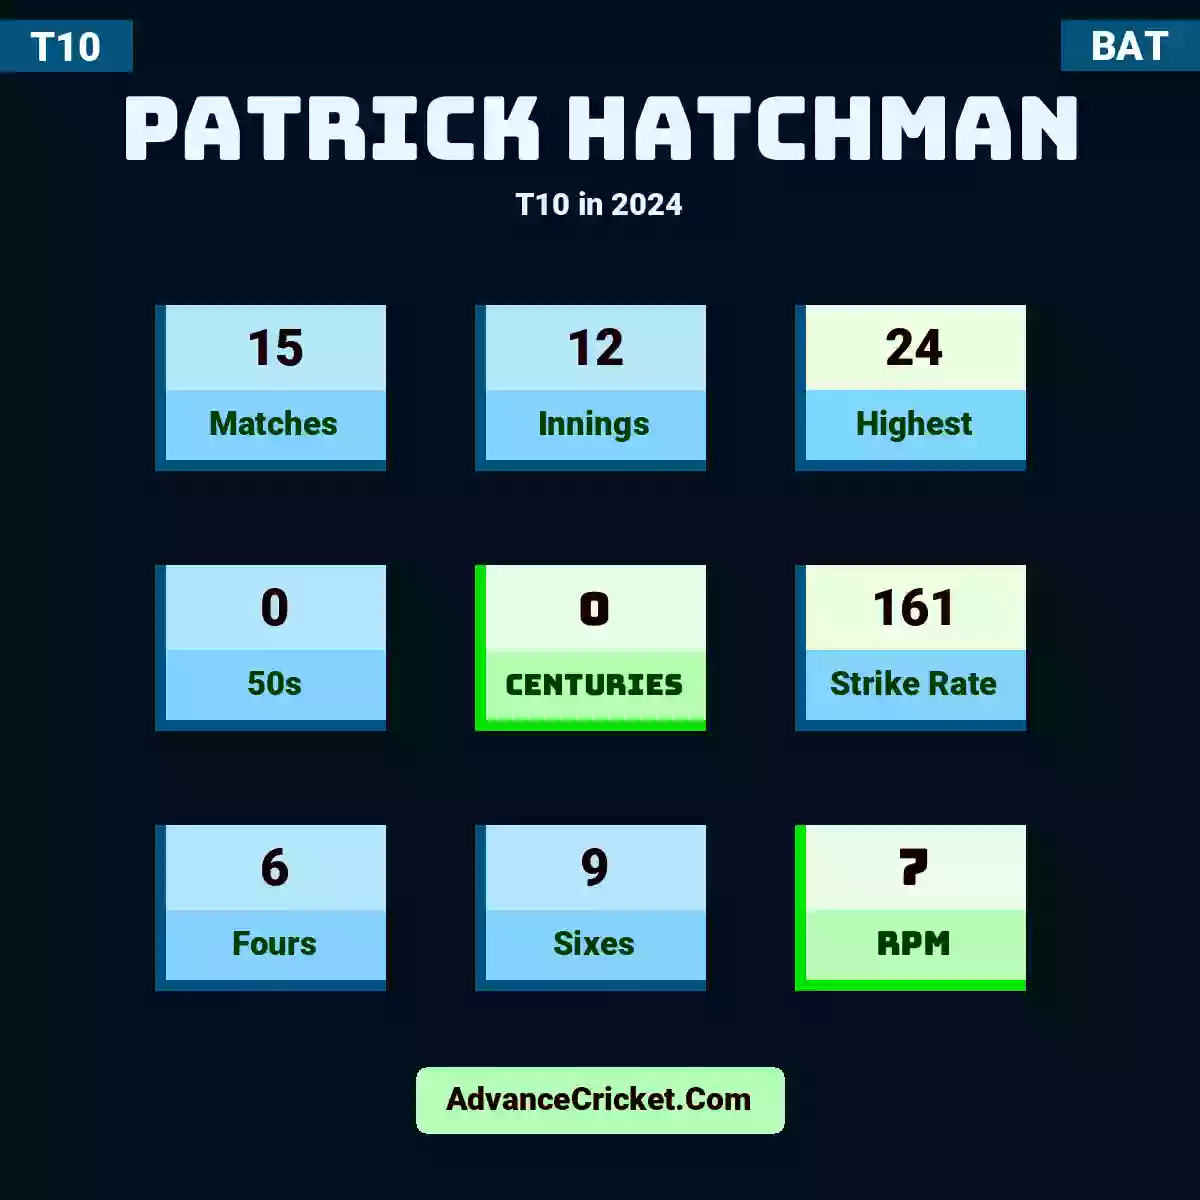 Patrick Hatchman T10  in 2024, Patrick Hatchman played 15 matches, scored 24 runs as highest, 0 half-centuries, and 0 centuries, with a strike rate of 161. P.Hatchman hit 6 fours and 9 sixes, with an RPM of 7.